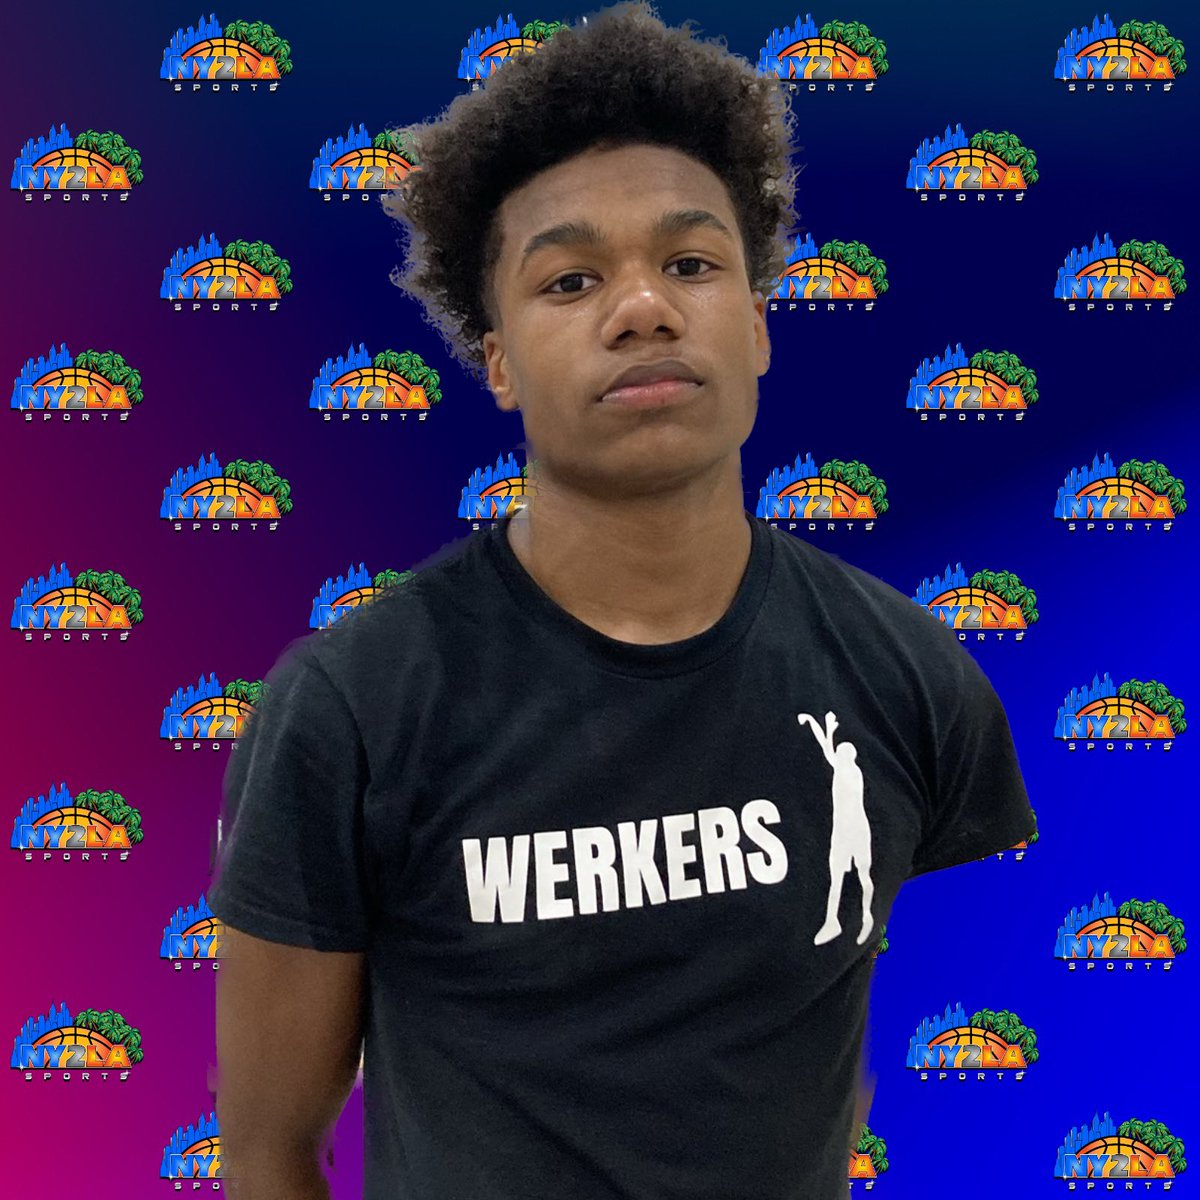 Another strong game for Haze Massey as he continues to be one of the top guards this tournament. The shot making ability was on display Friday, today it’s his play on the attack scoring & distributing it. Name to know in the 2028 class. @KesselHeatAAU @GNBABASKETBALL @ny2lasports